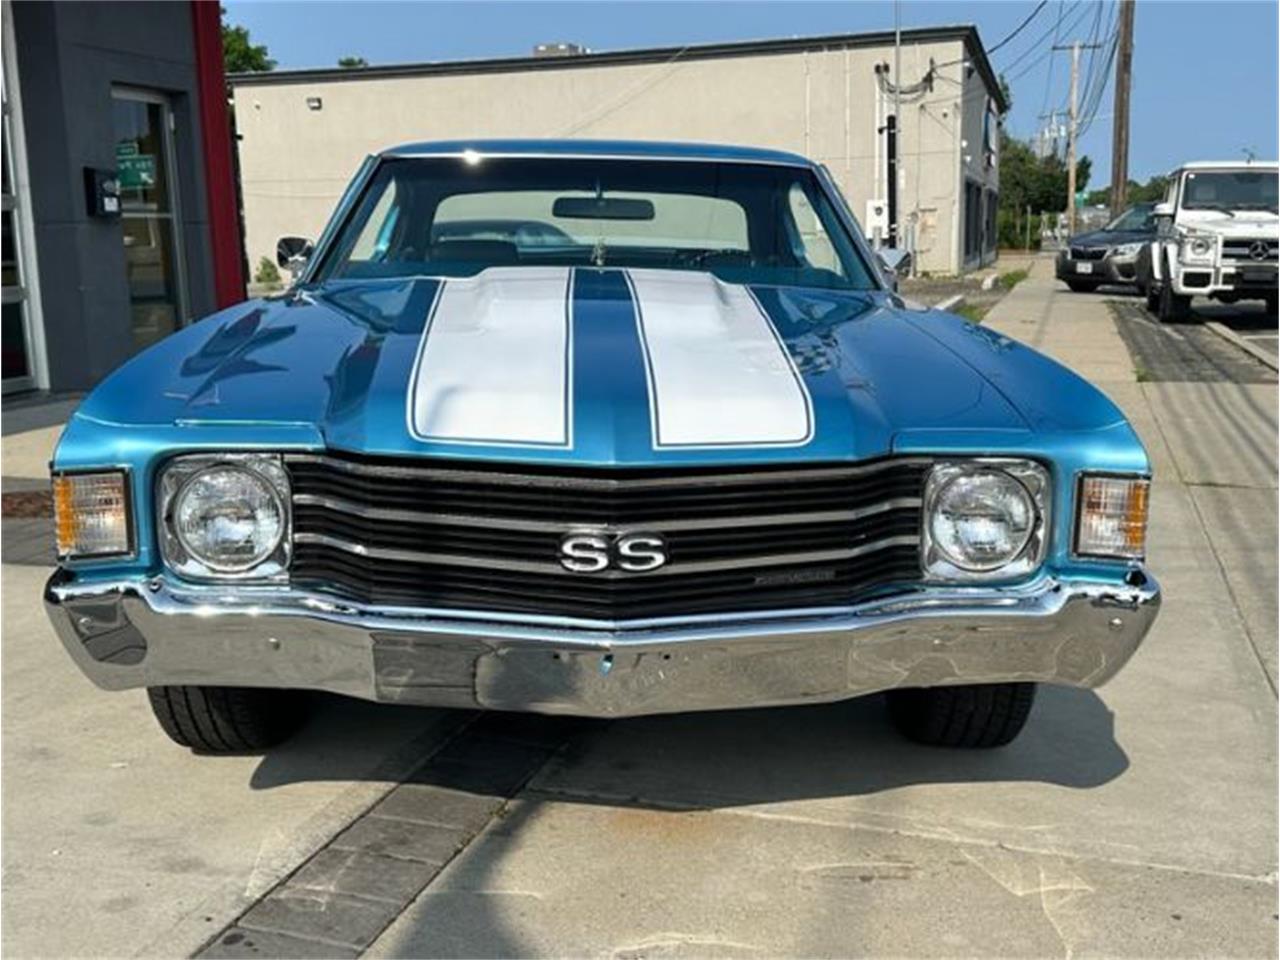 For Sale: 1972 Chevrolet Chevelle in Cadillac, Michigan for sale in Cadillac, MI